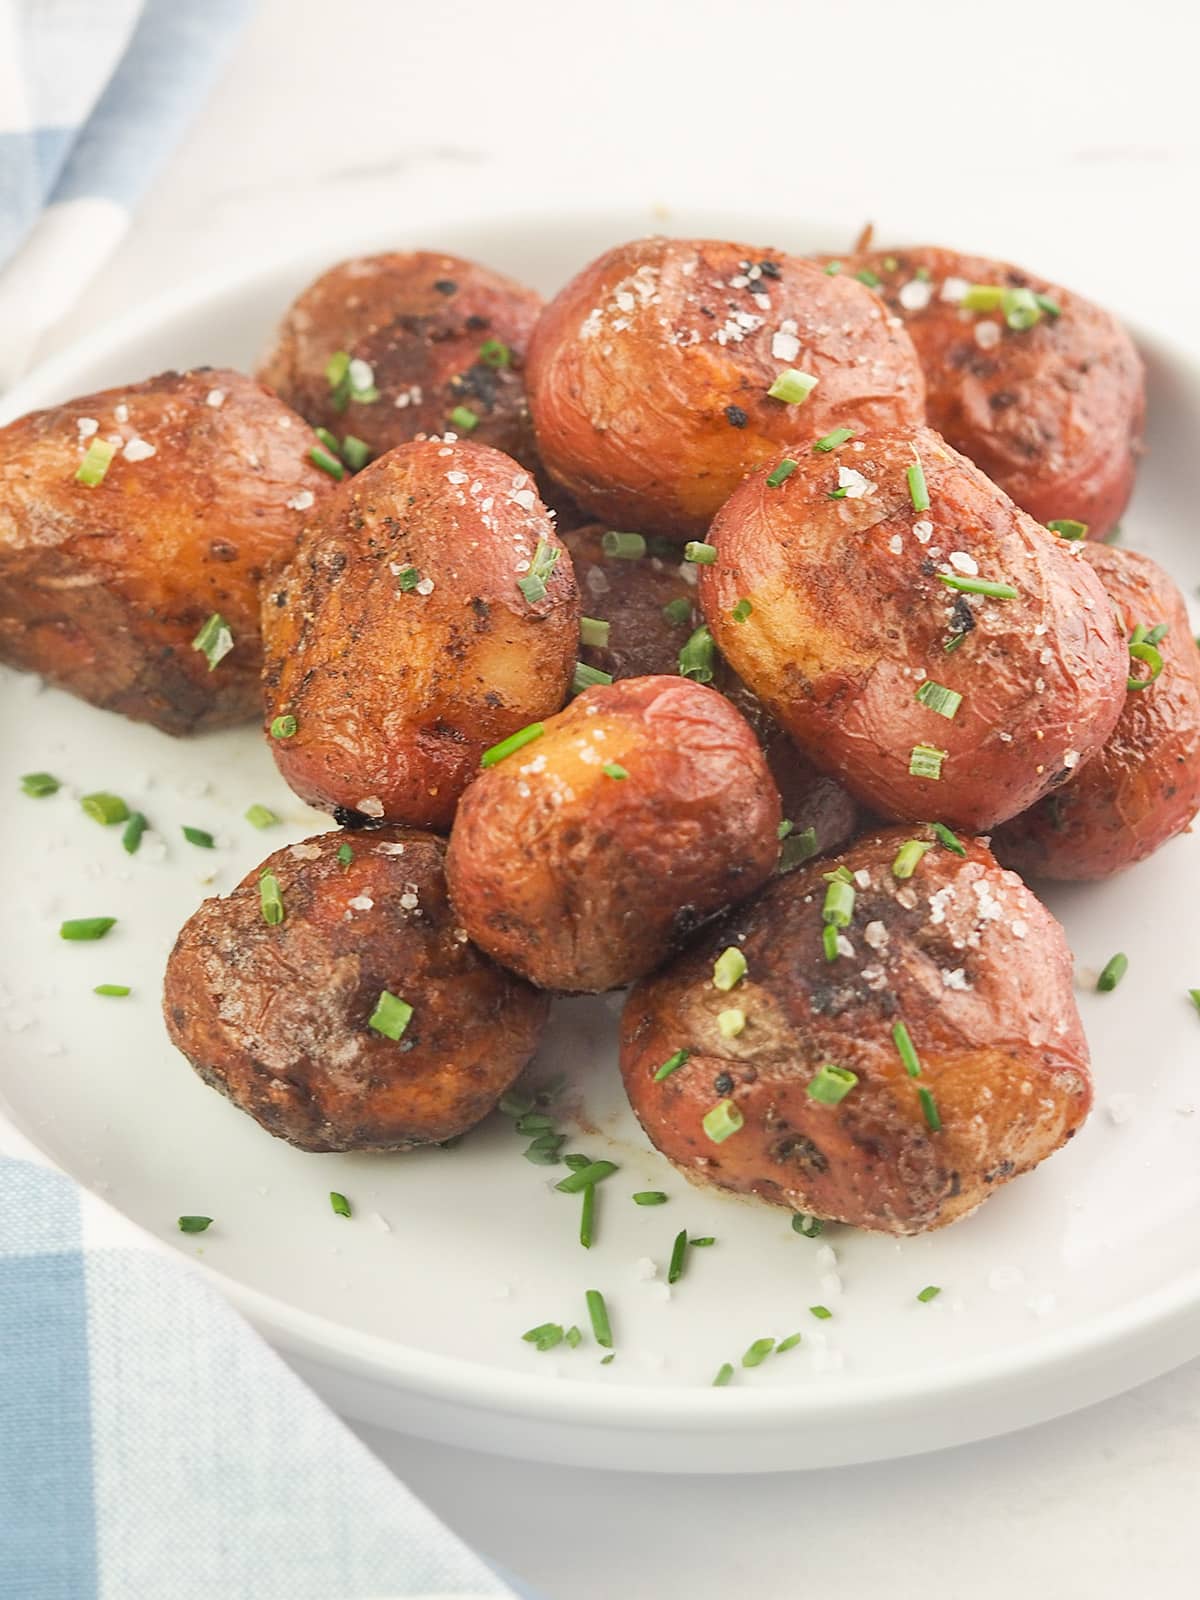 https://mondayismeatloaf.com/wp-content/uploads/2022/06/roasted-red-potatoes-salted-with-chives-on-white-plate.jpg